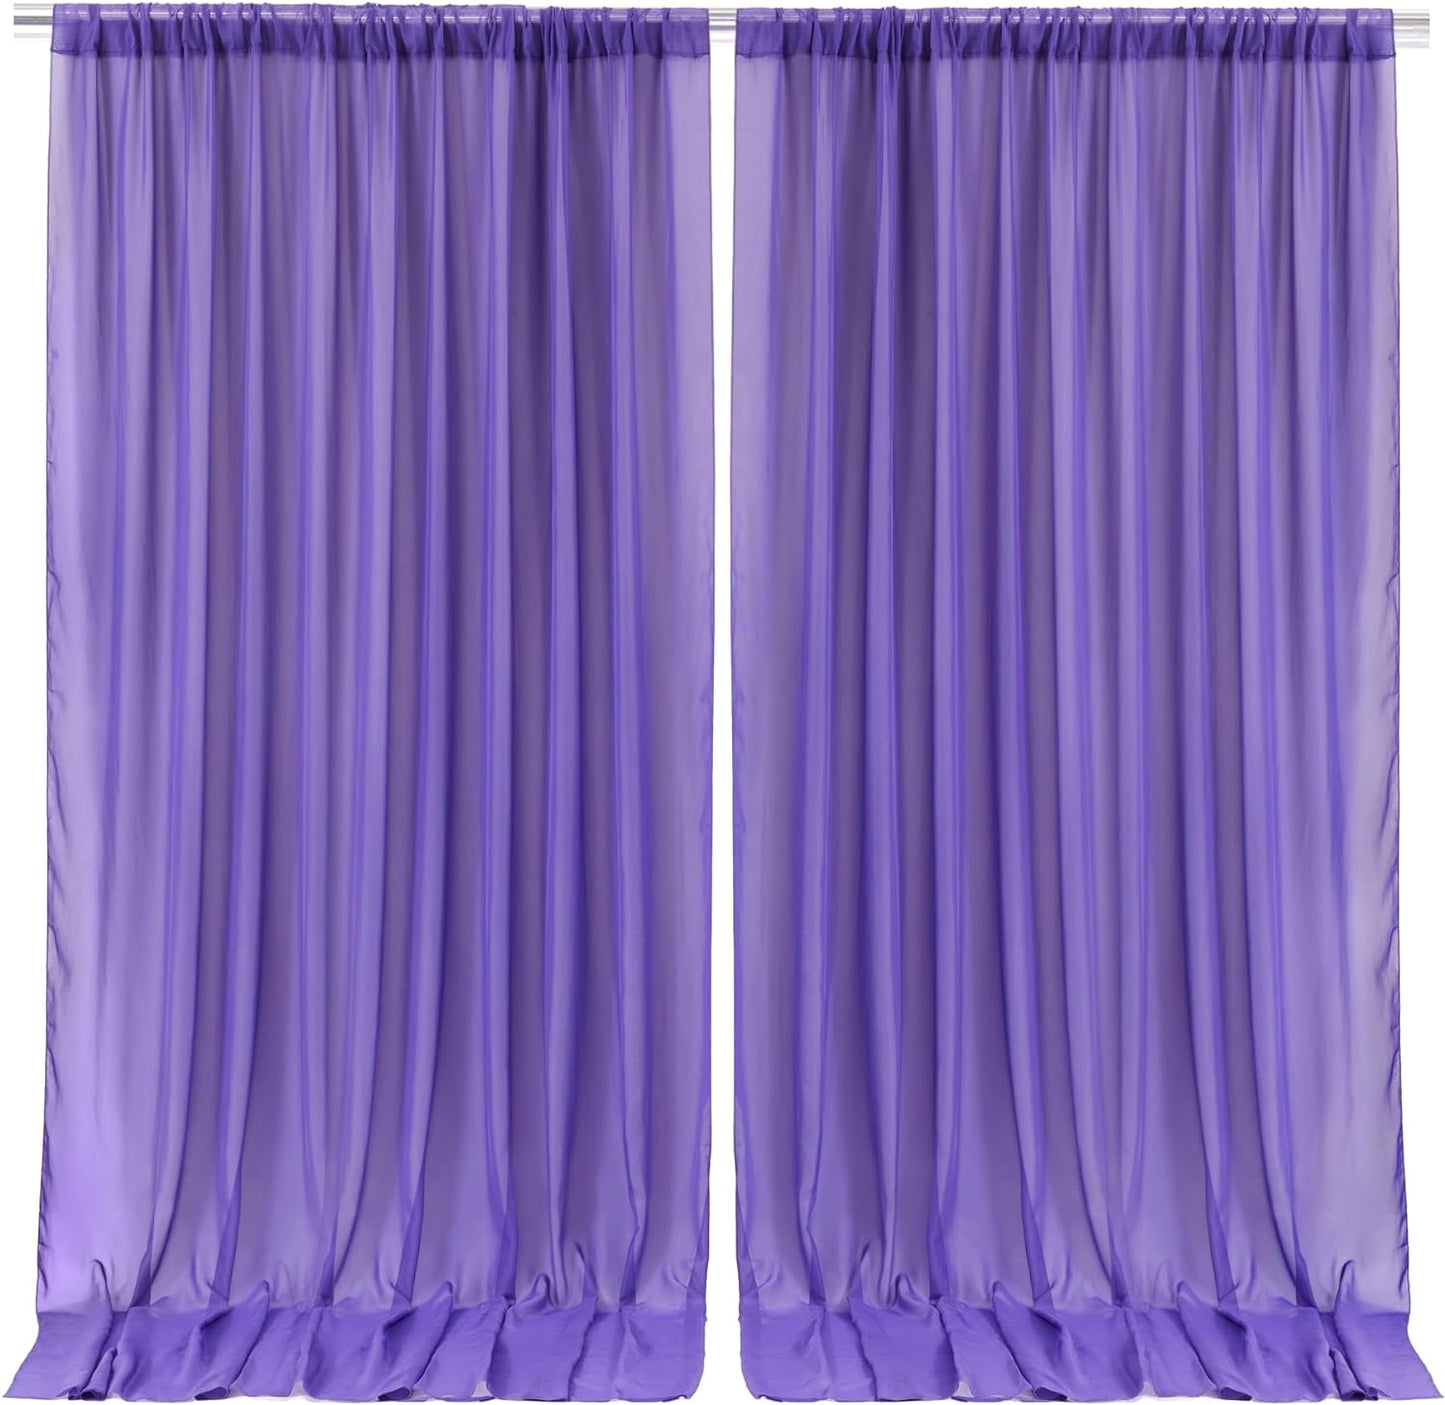 10Ft X 10Ft White Chiffon Backdrop Curtains, Wrinkle-Free Sheer Chiffon Fabric Curtain Drapes for Wedding Ceremony Arch Party Stage Decoration  Wish Care Purple  